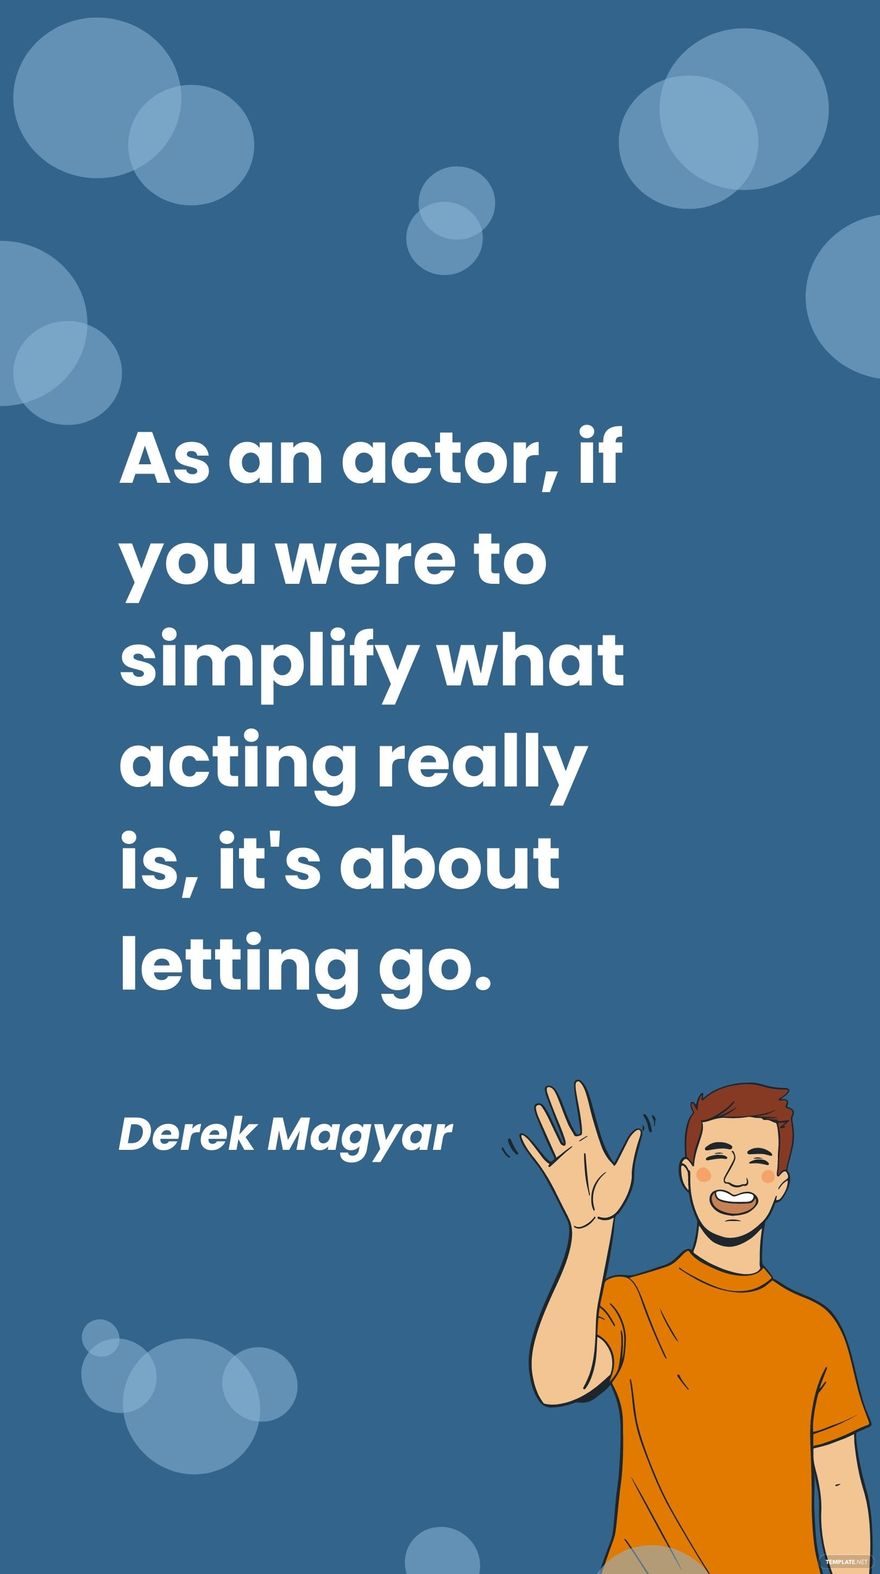 Derek Magyar - As an actor, if you were to simplify what acting really is, it's about letting go.